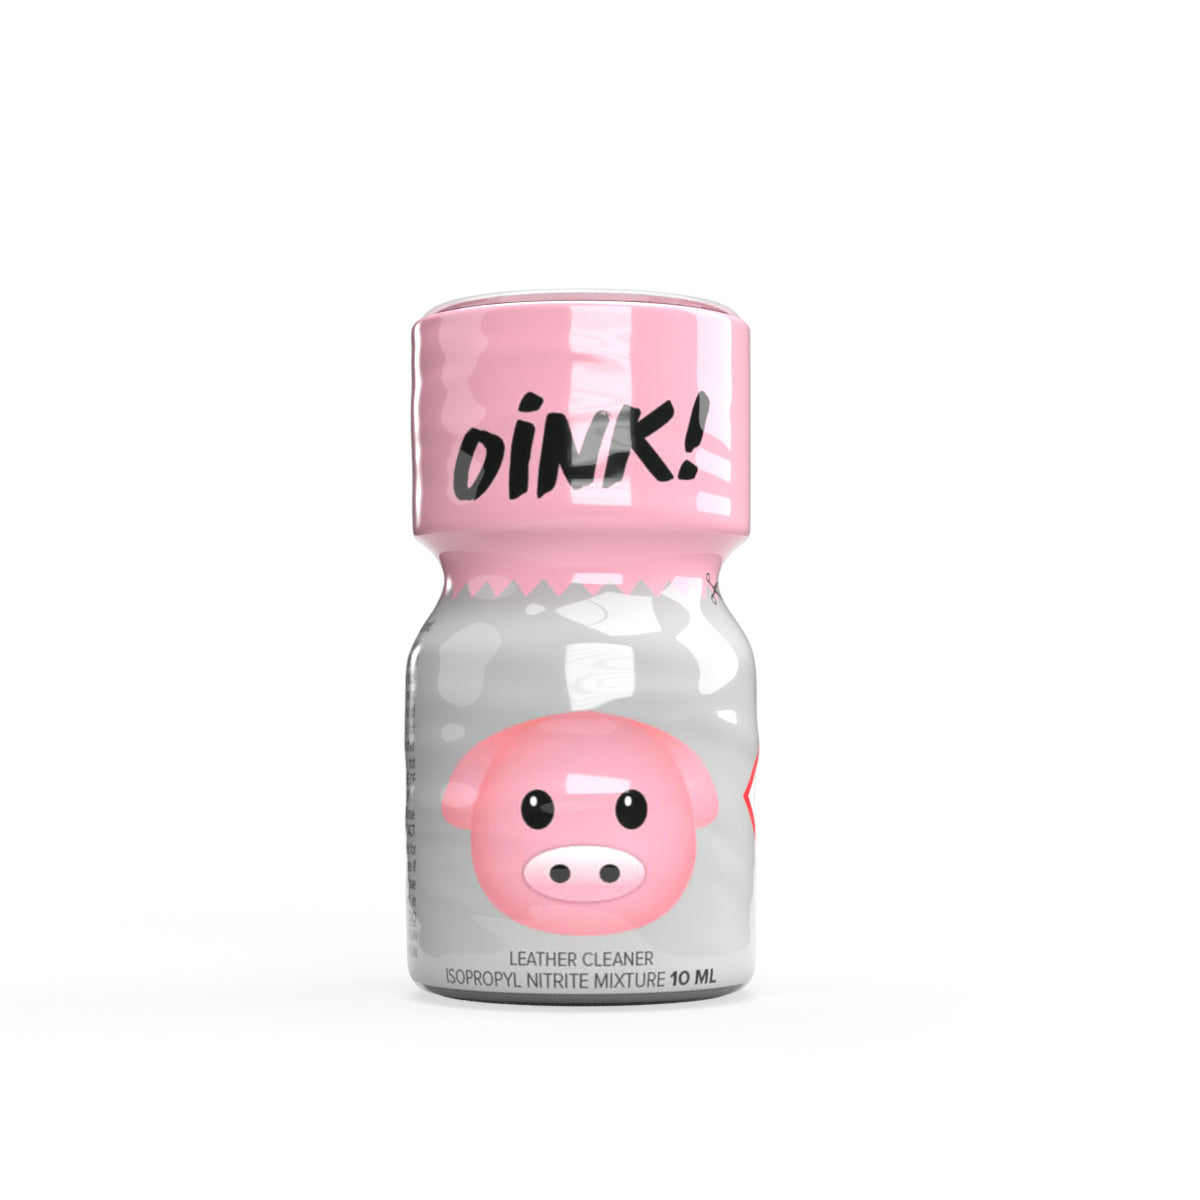 A front-facing  product photo of a bottle of Oink Poppers.